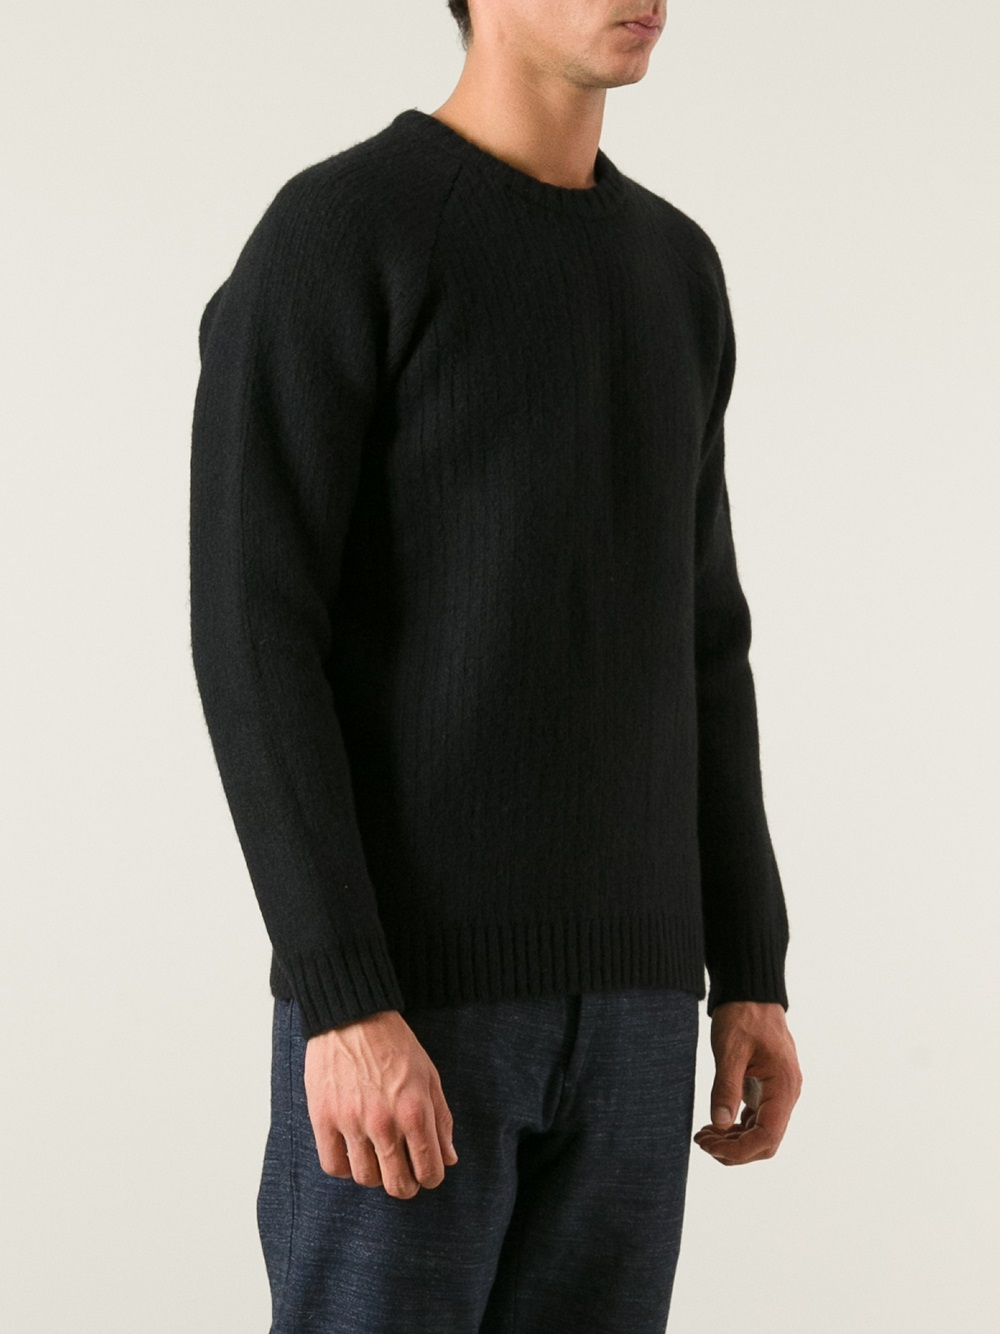 Our Legacy Crew Neck Sweater in Black for Men - Lyst